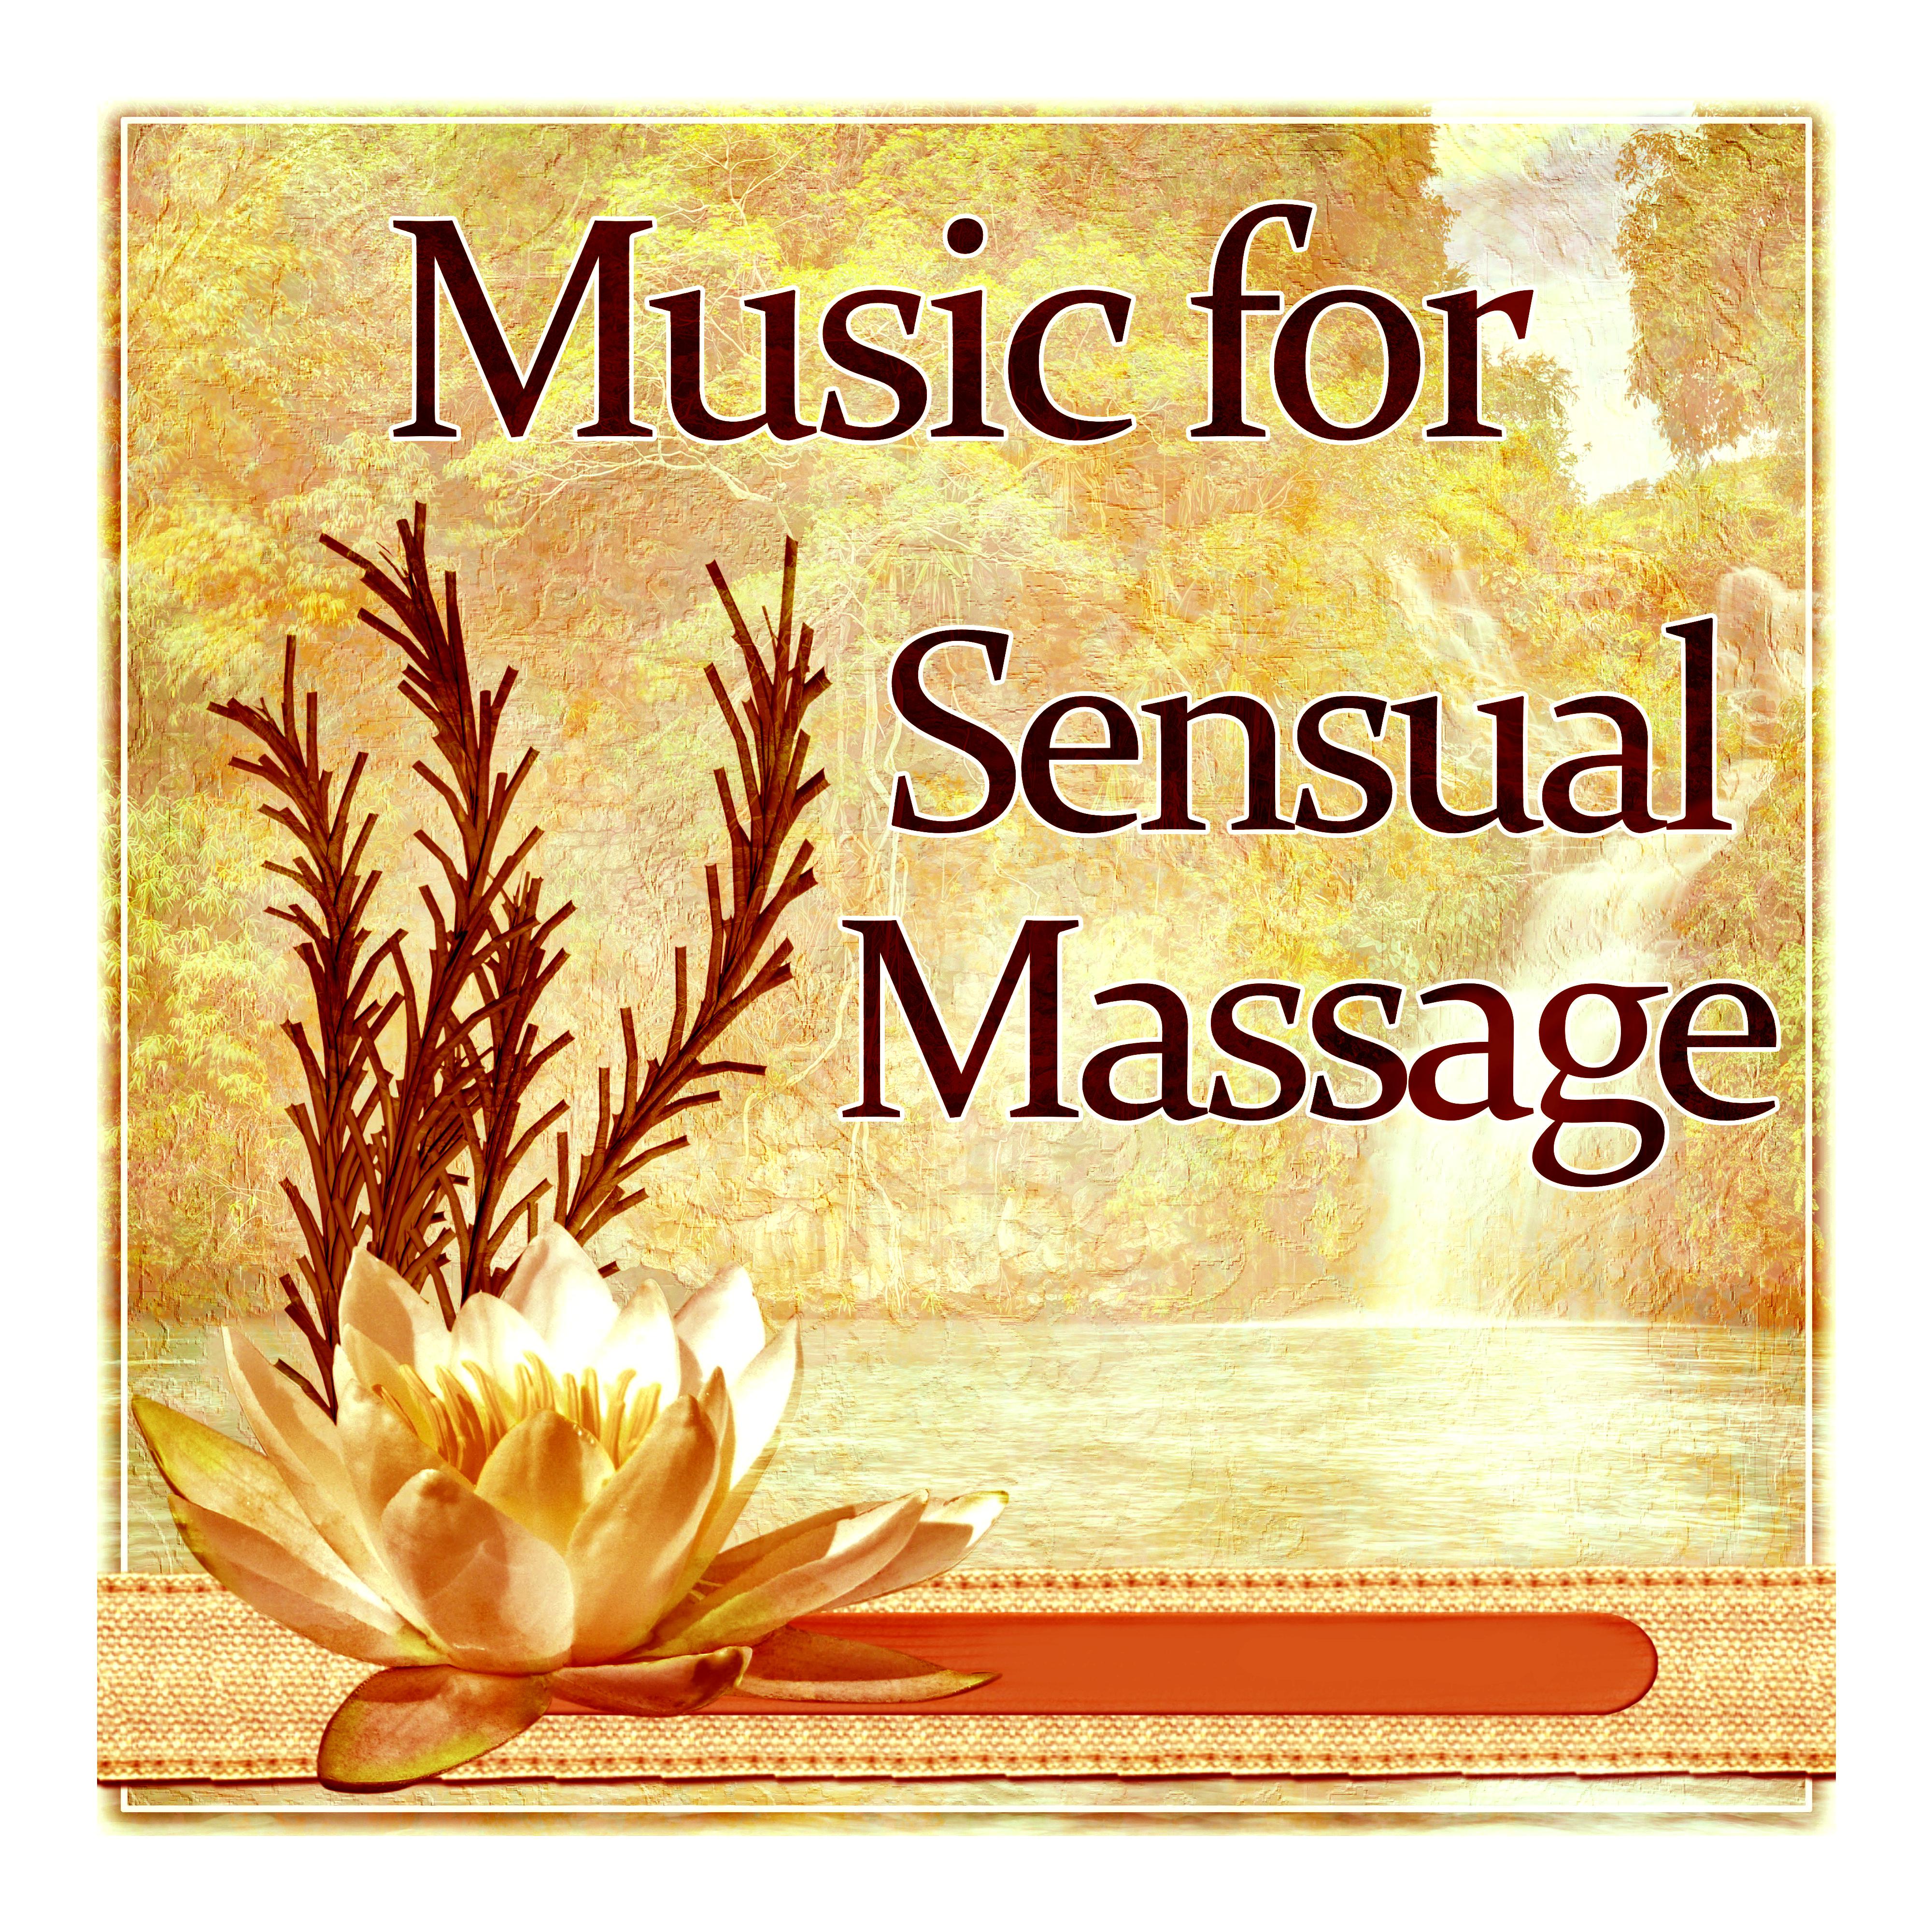 Music for Sensual Massage – Paradise in Spa, New Age, Soothing Music, Calm Music for Relax, Deep Sounds for Massage, Harmony of Senses, Pure Nature Sounds, Stress Relief